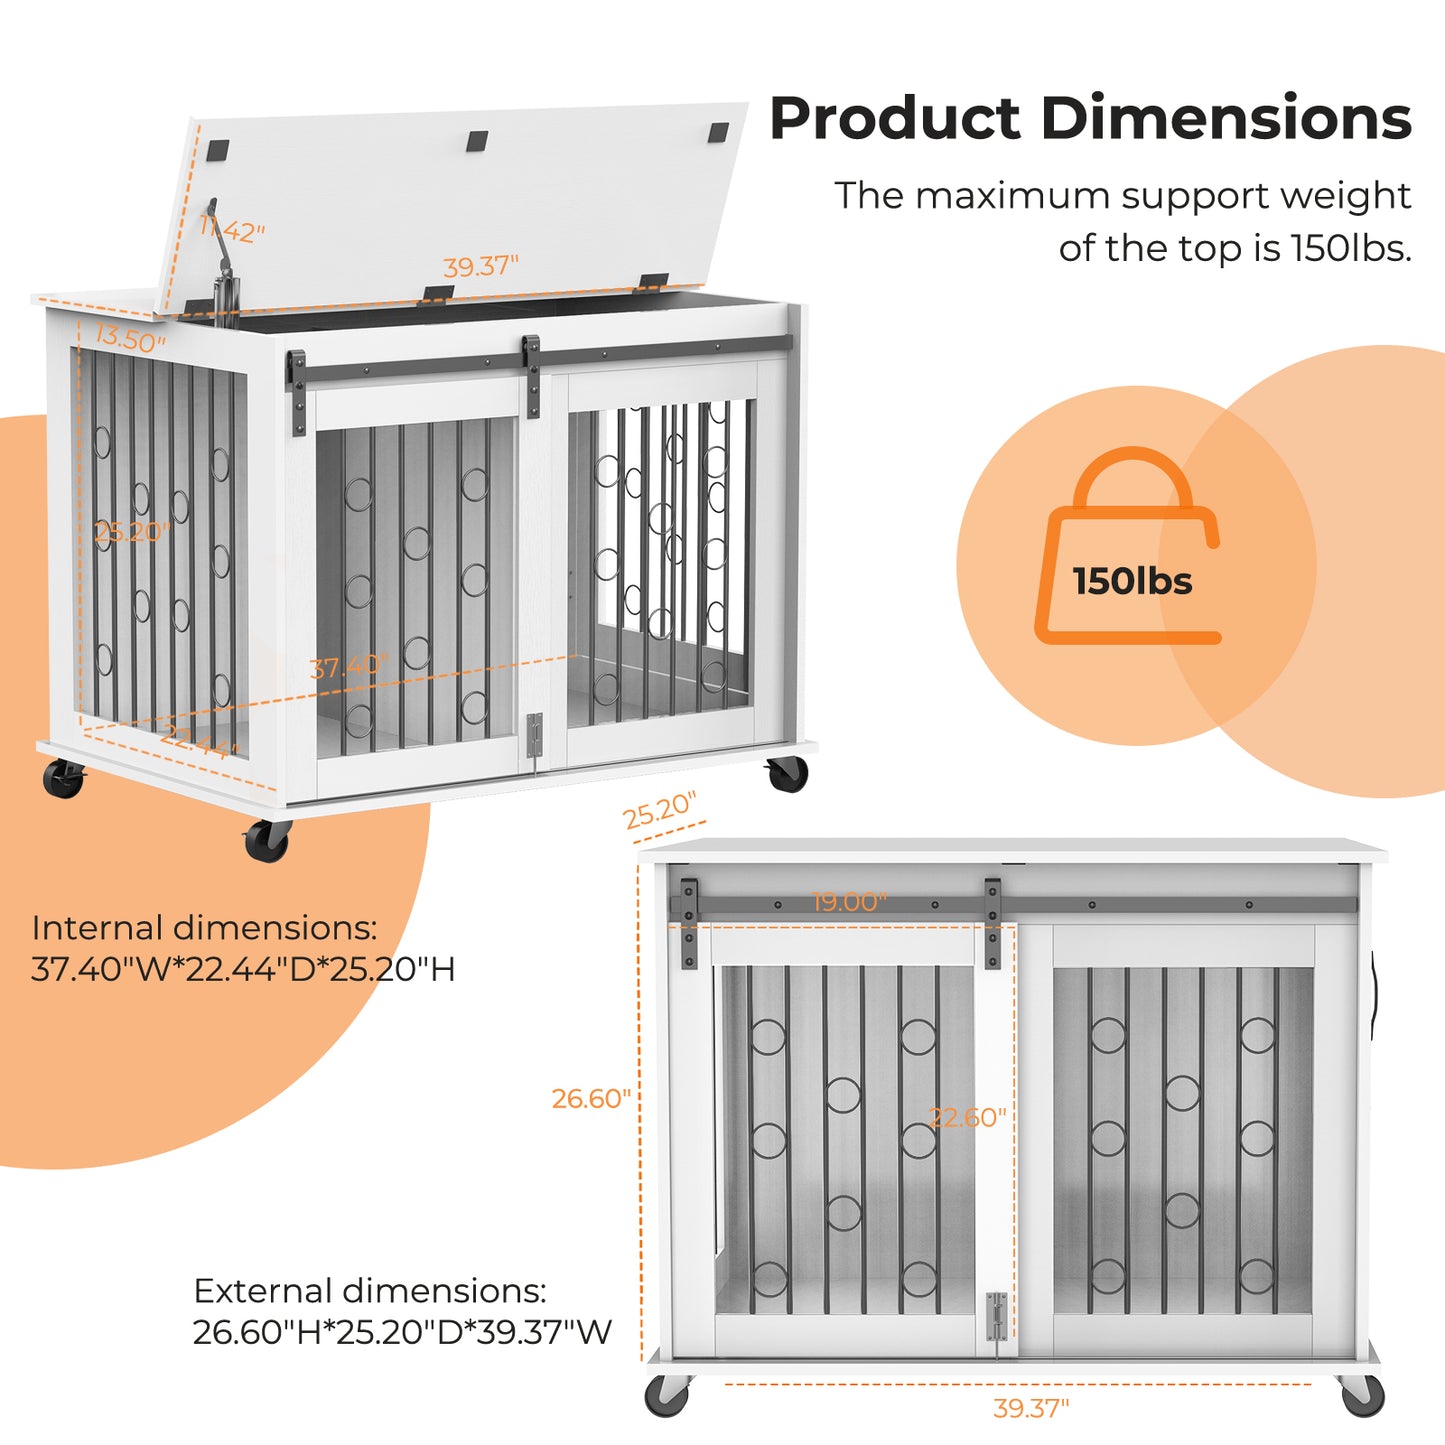 Lyromix Dog Crate Furniture with Divider for 2 Small to Medium Pets, Wooden Cage End Table, Heavy Duty Indoor Puppy Kennel with Removable Divider and Sliding Door, Grey